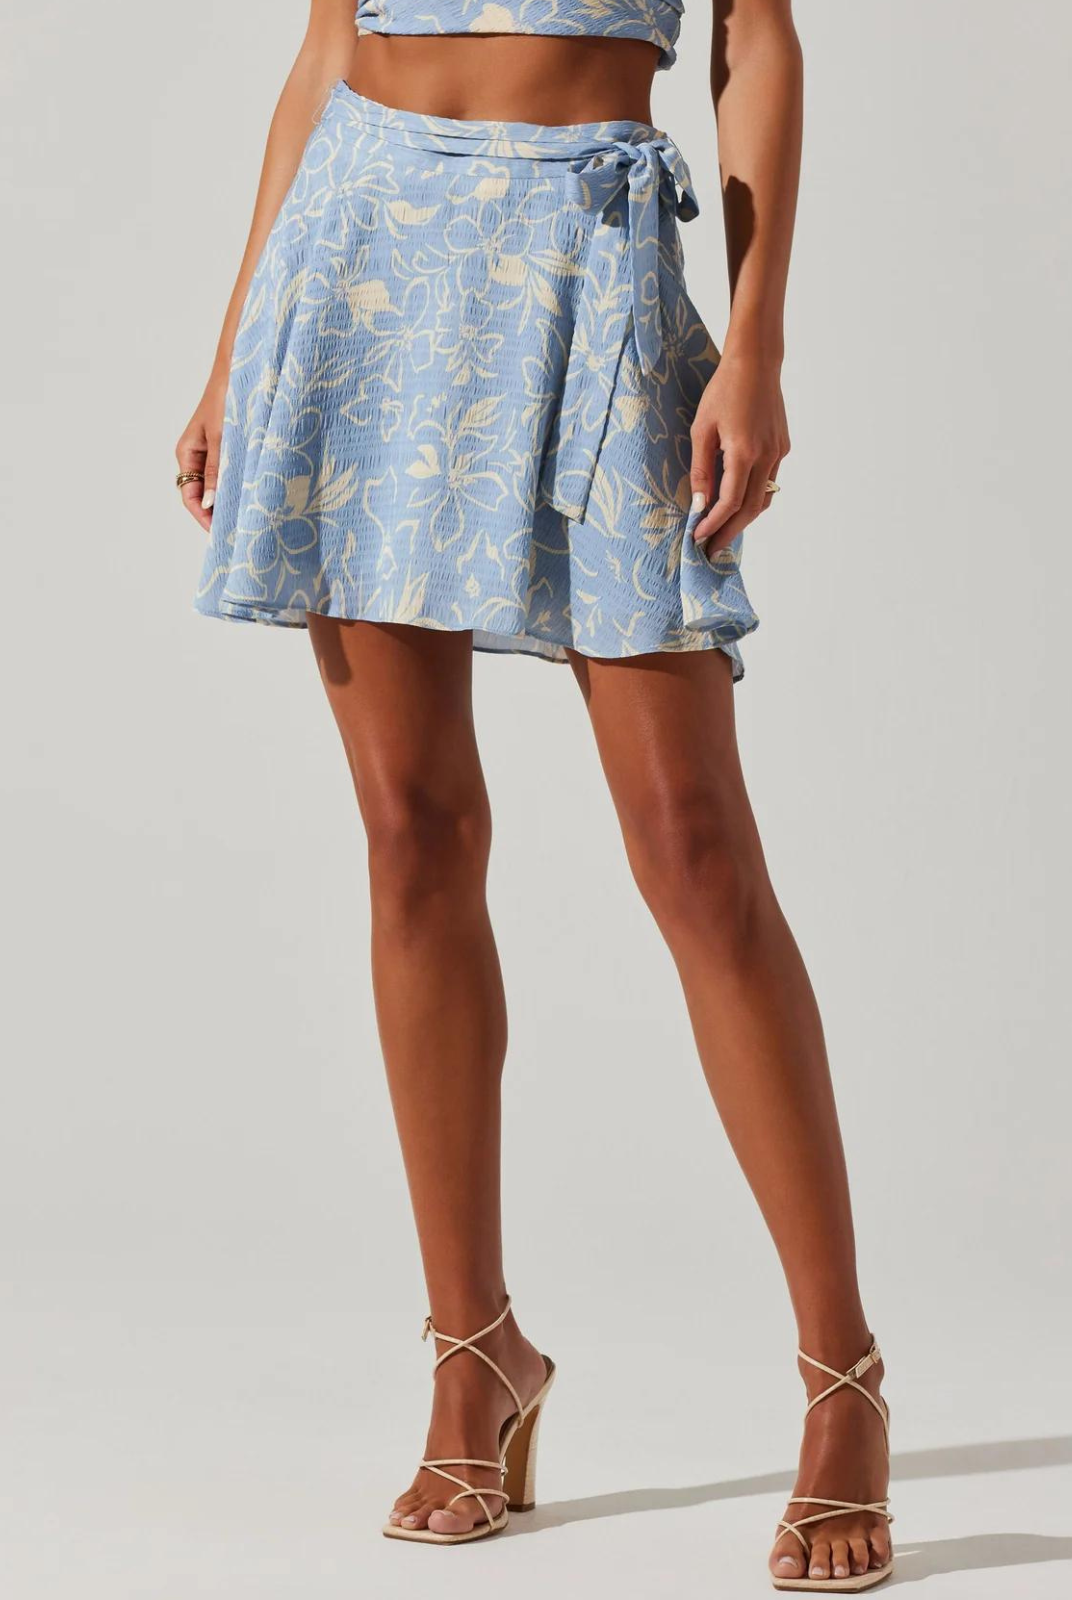 ASTR The Label Tazia Skirt. Sketched floral design Fitted at waist with relaxed skirt Concealed side zipper with side tie detail The Tazia Skirt pairs well with the Tazia Top.